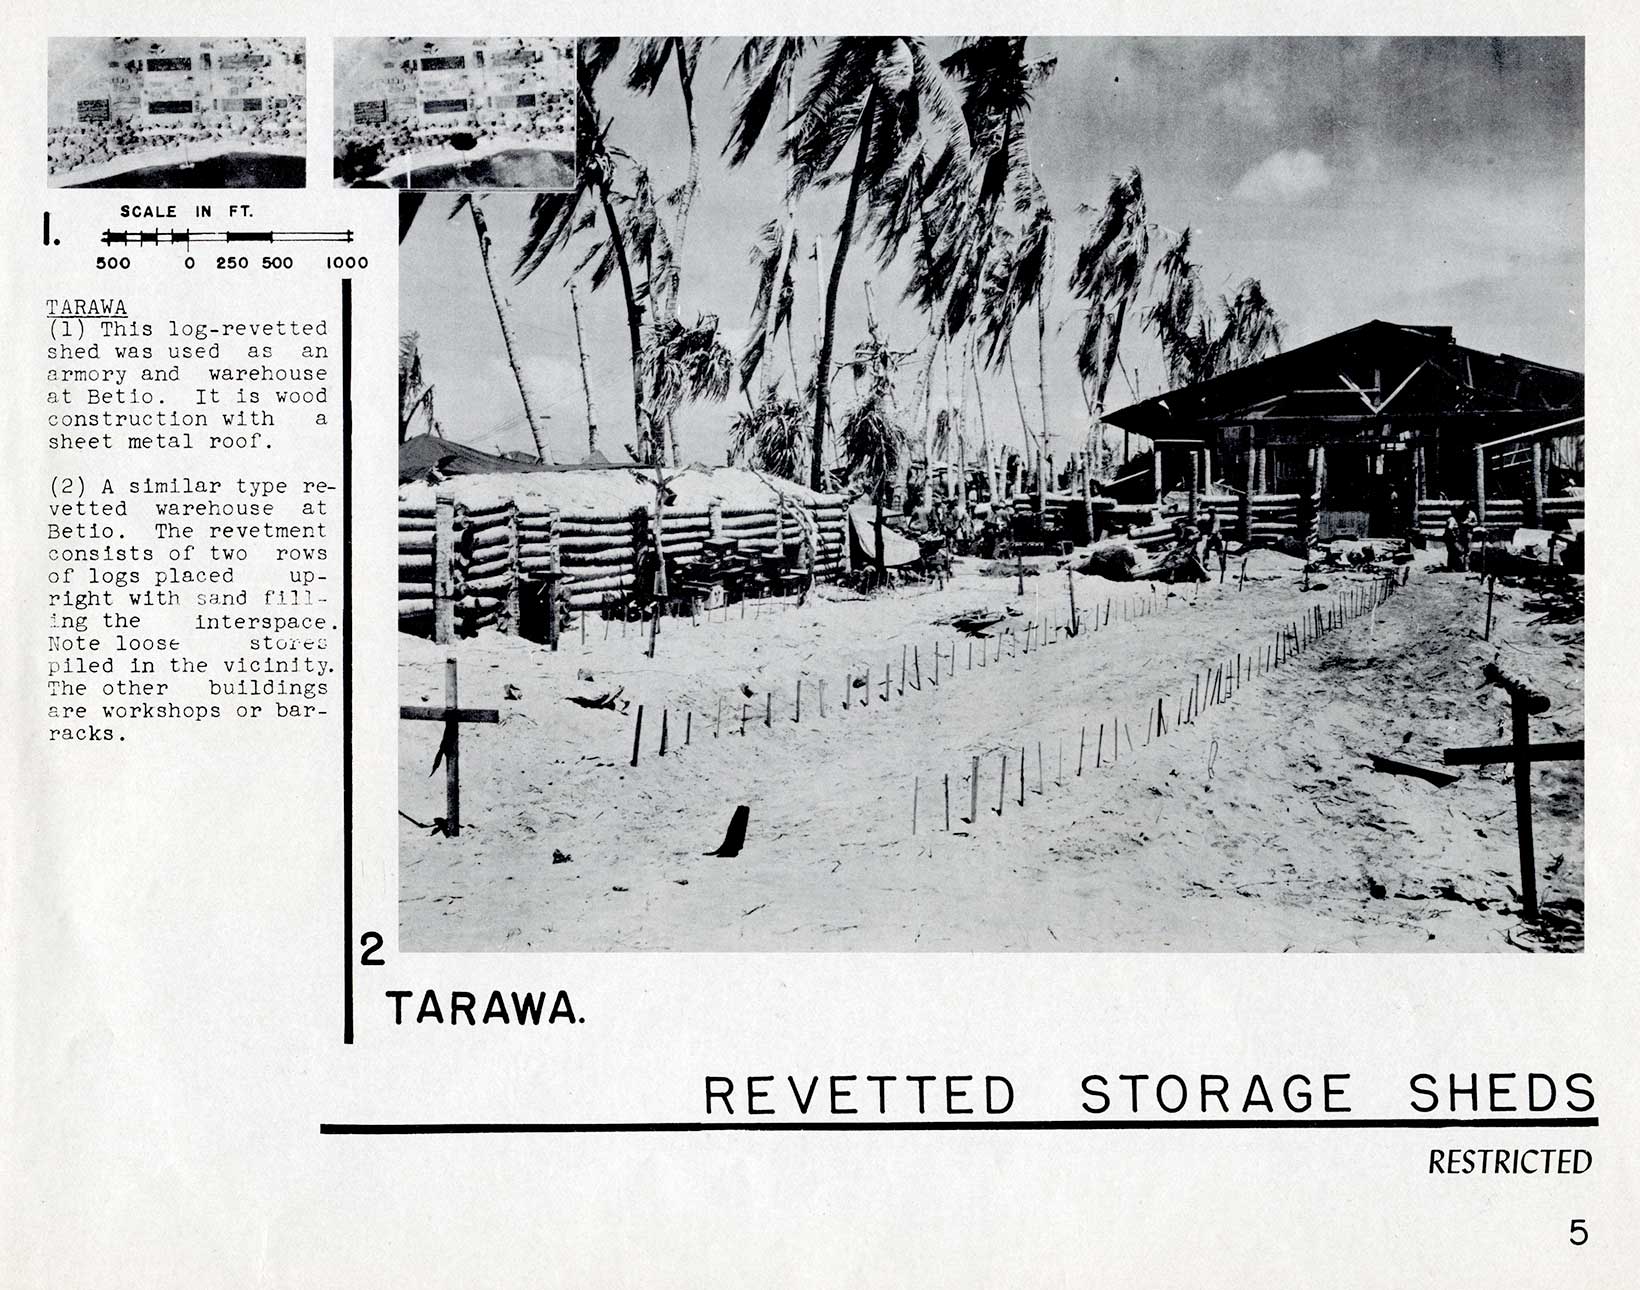 REVETTED STORAGE SHEDSTARAWA (1) This log-revetted shed was used as an armory and warehouse at Betio. It is wood construction with a sheet metal roof. (2) A similar type re-vetted warehouse at Betio. The revetment consists of two rows of logs placed upright with sand filling the interspace. Note loose stores piled in the vicinity. The other buildings are workshops or barracks.5